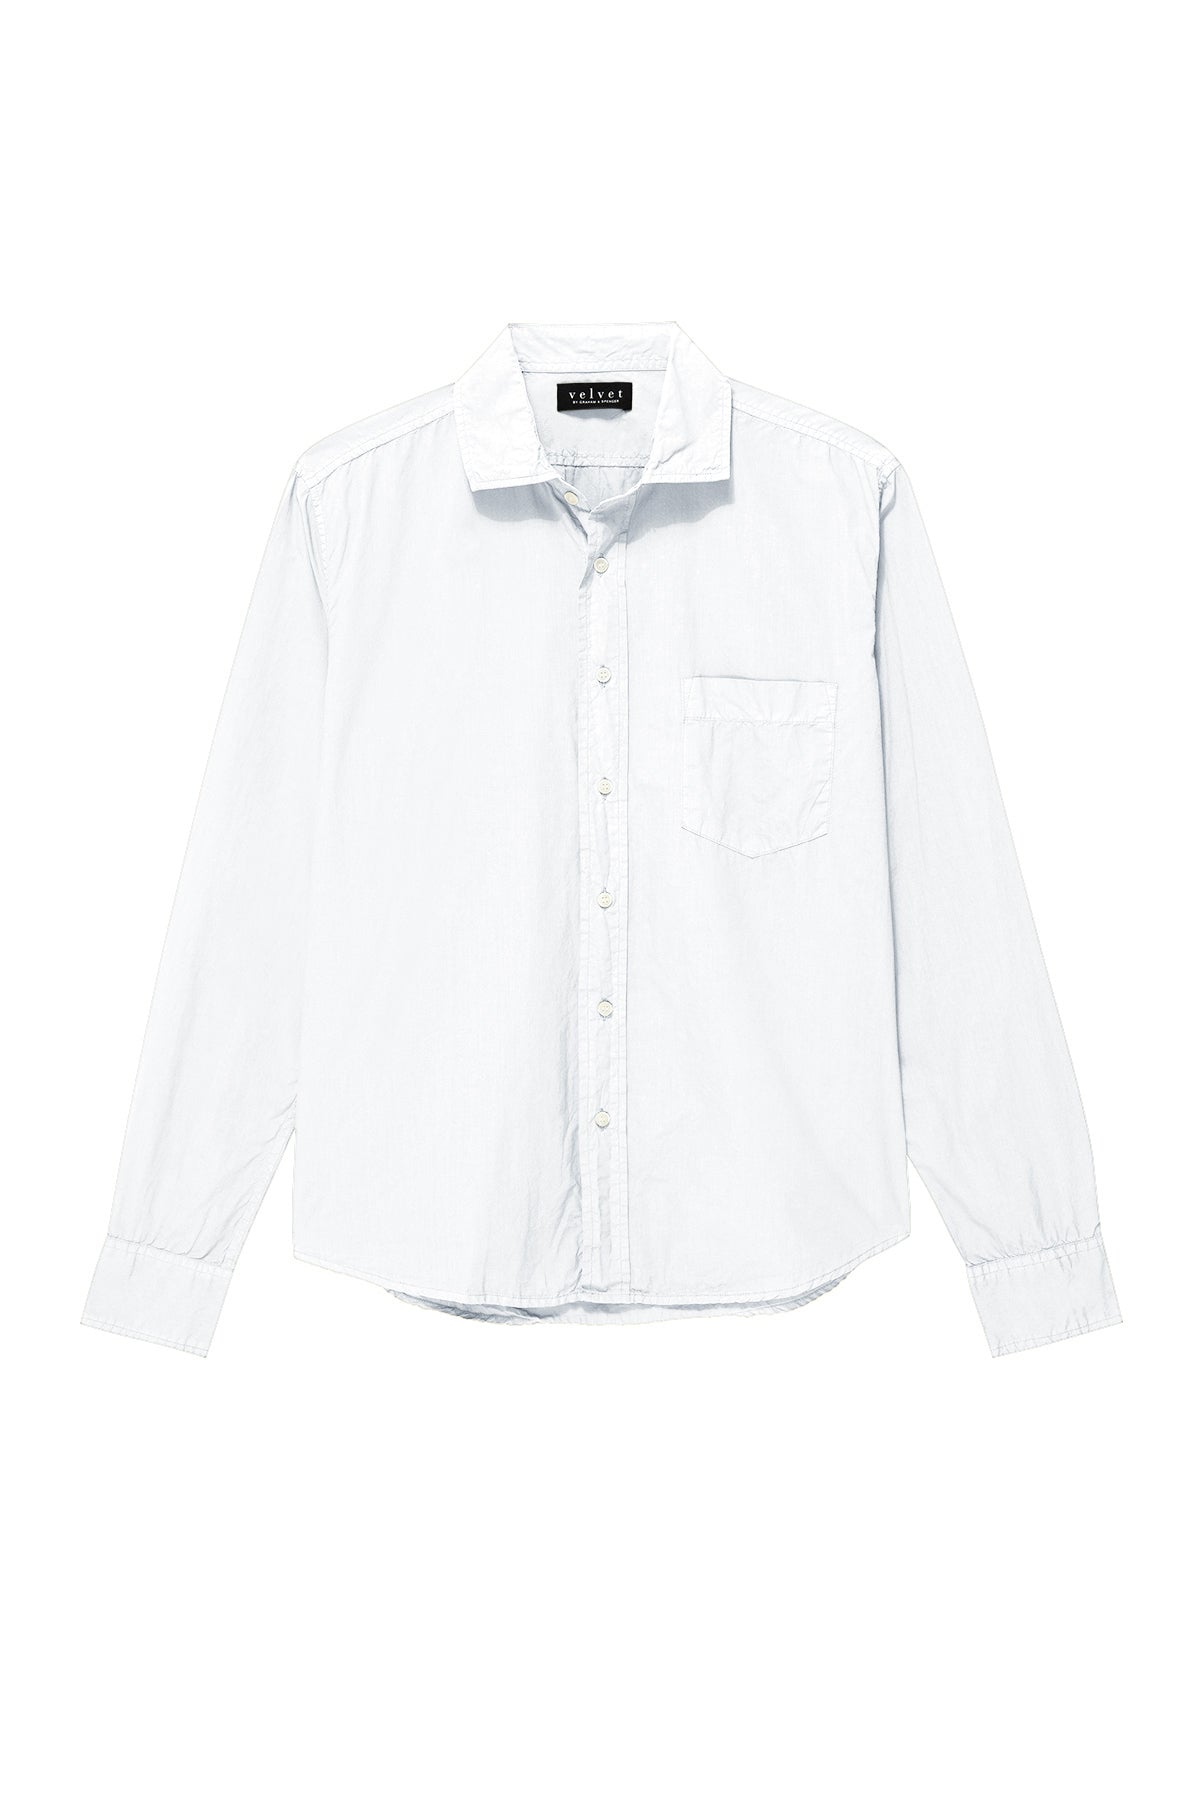 Brooks Button-Up Shirt in white flat-26249638412481